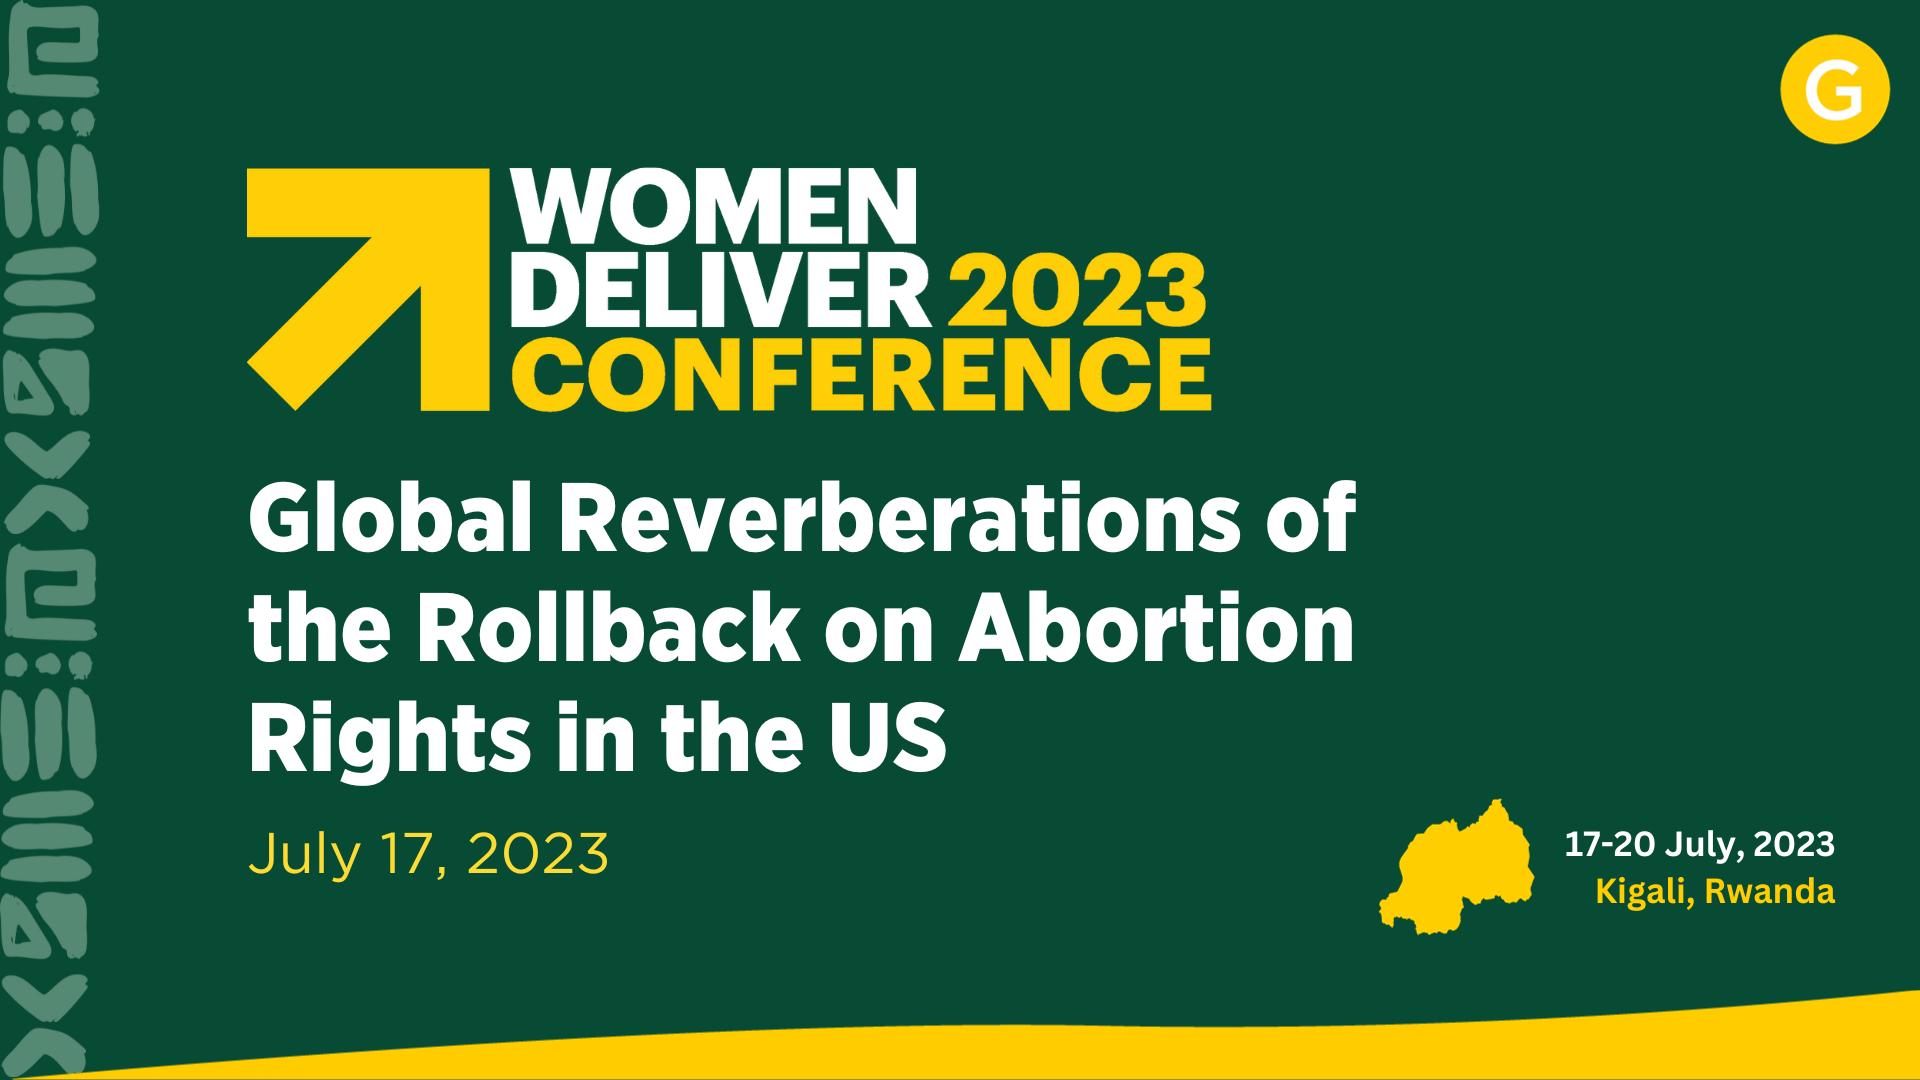 Women Deliver 2023 Conference - Video title page